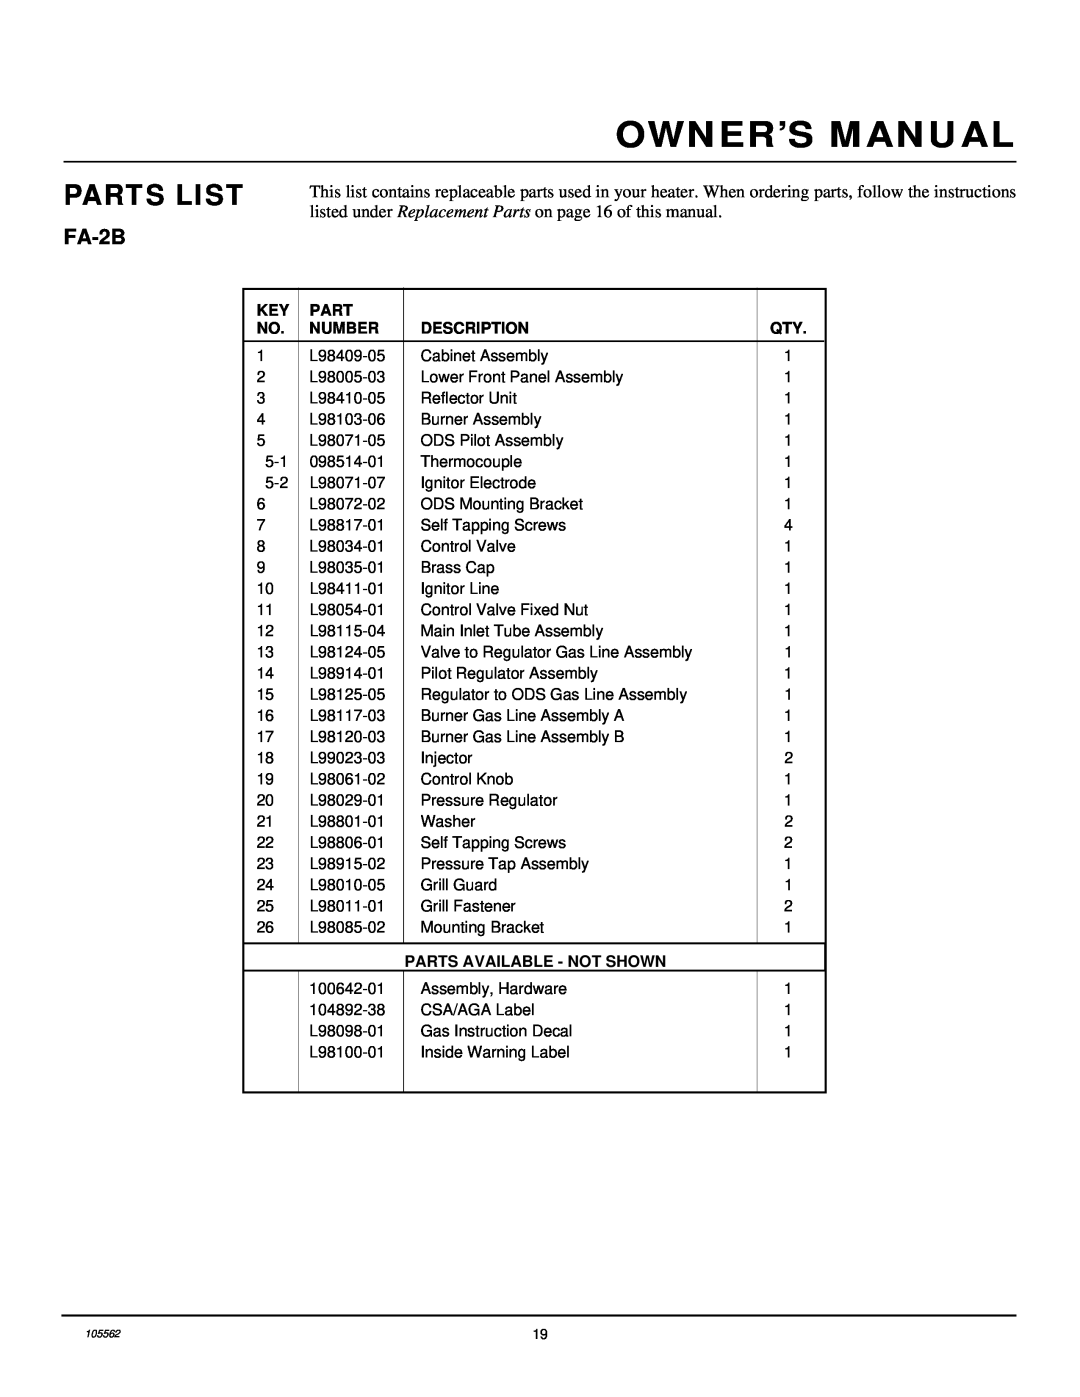 Desa FA-2B installation manual Parts List, Owner’S Manual, Number, Description, Parts Available - Not Shown 